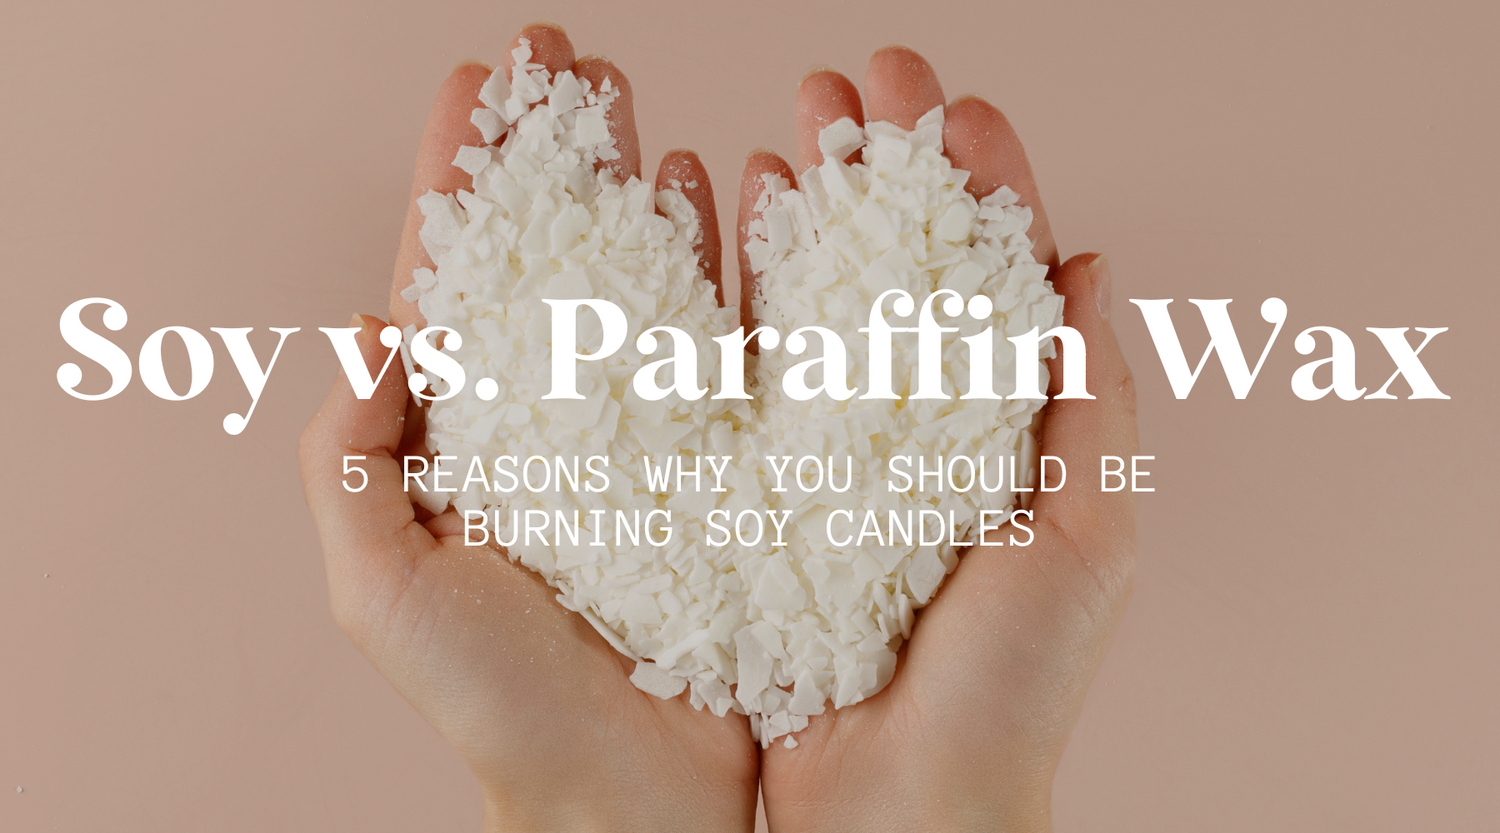 Soy vs. Paraffin Blog Cover Photo